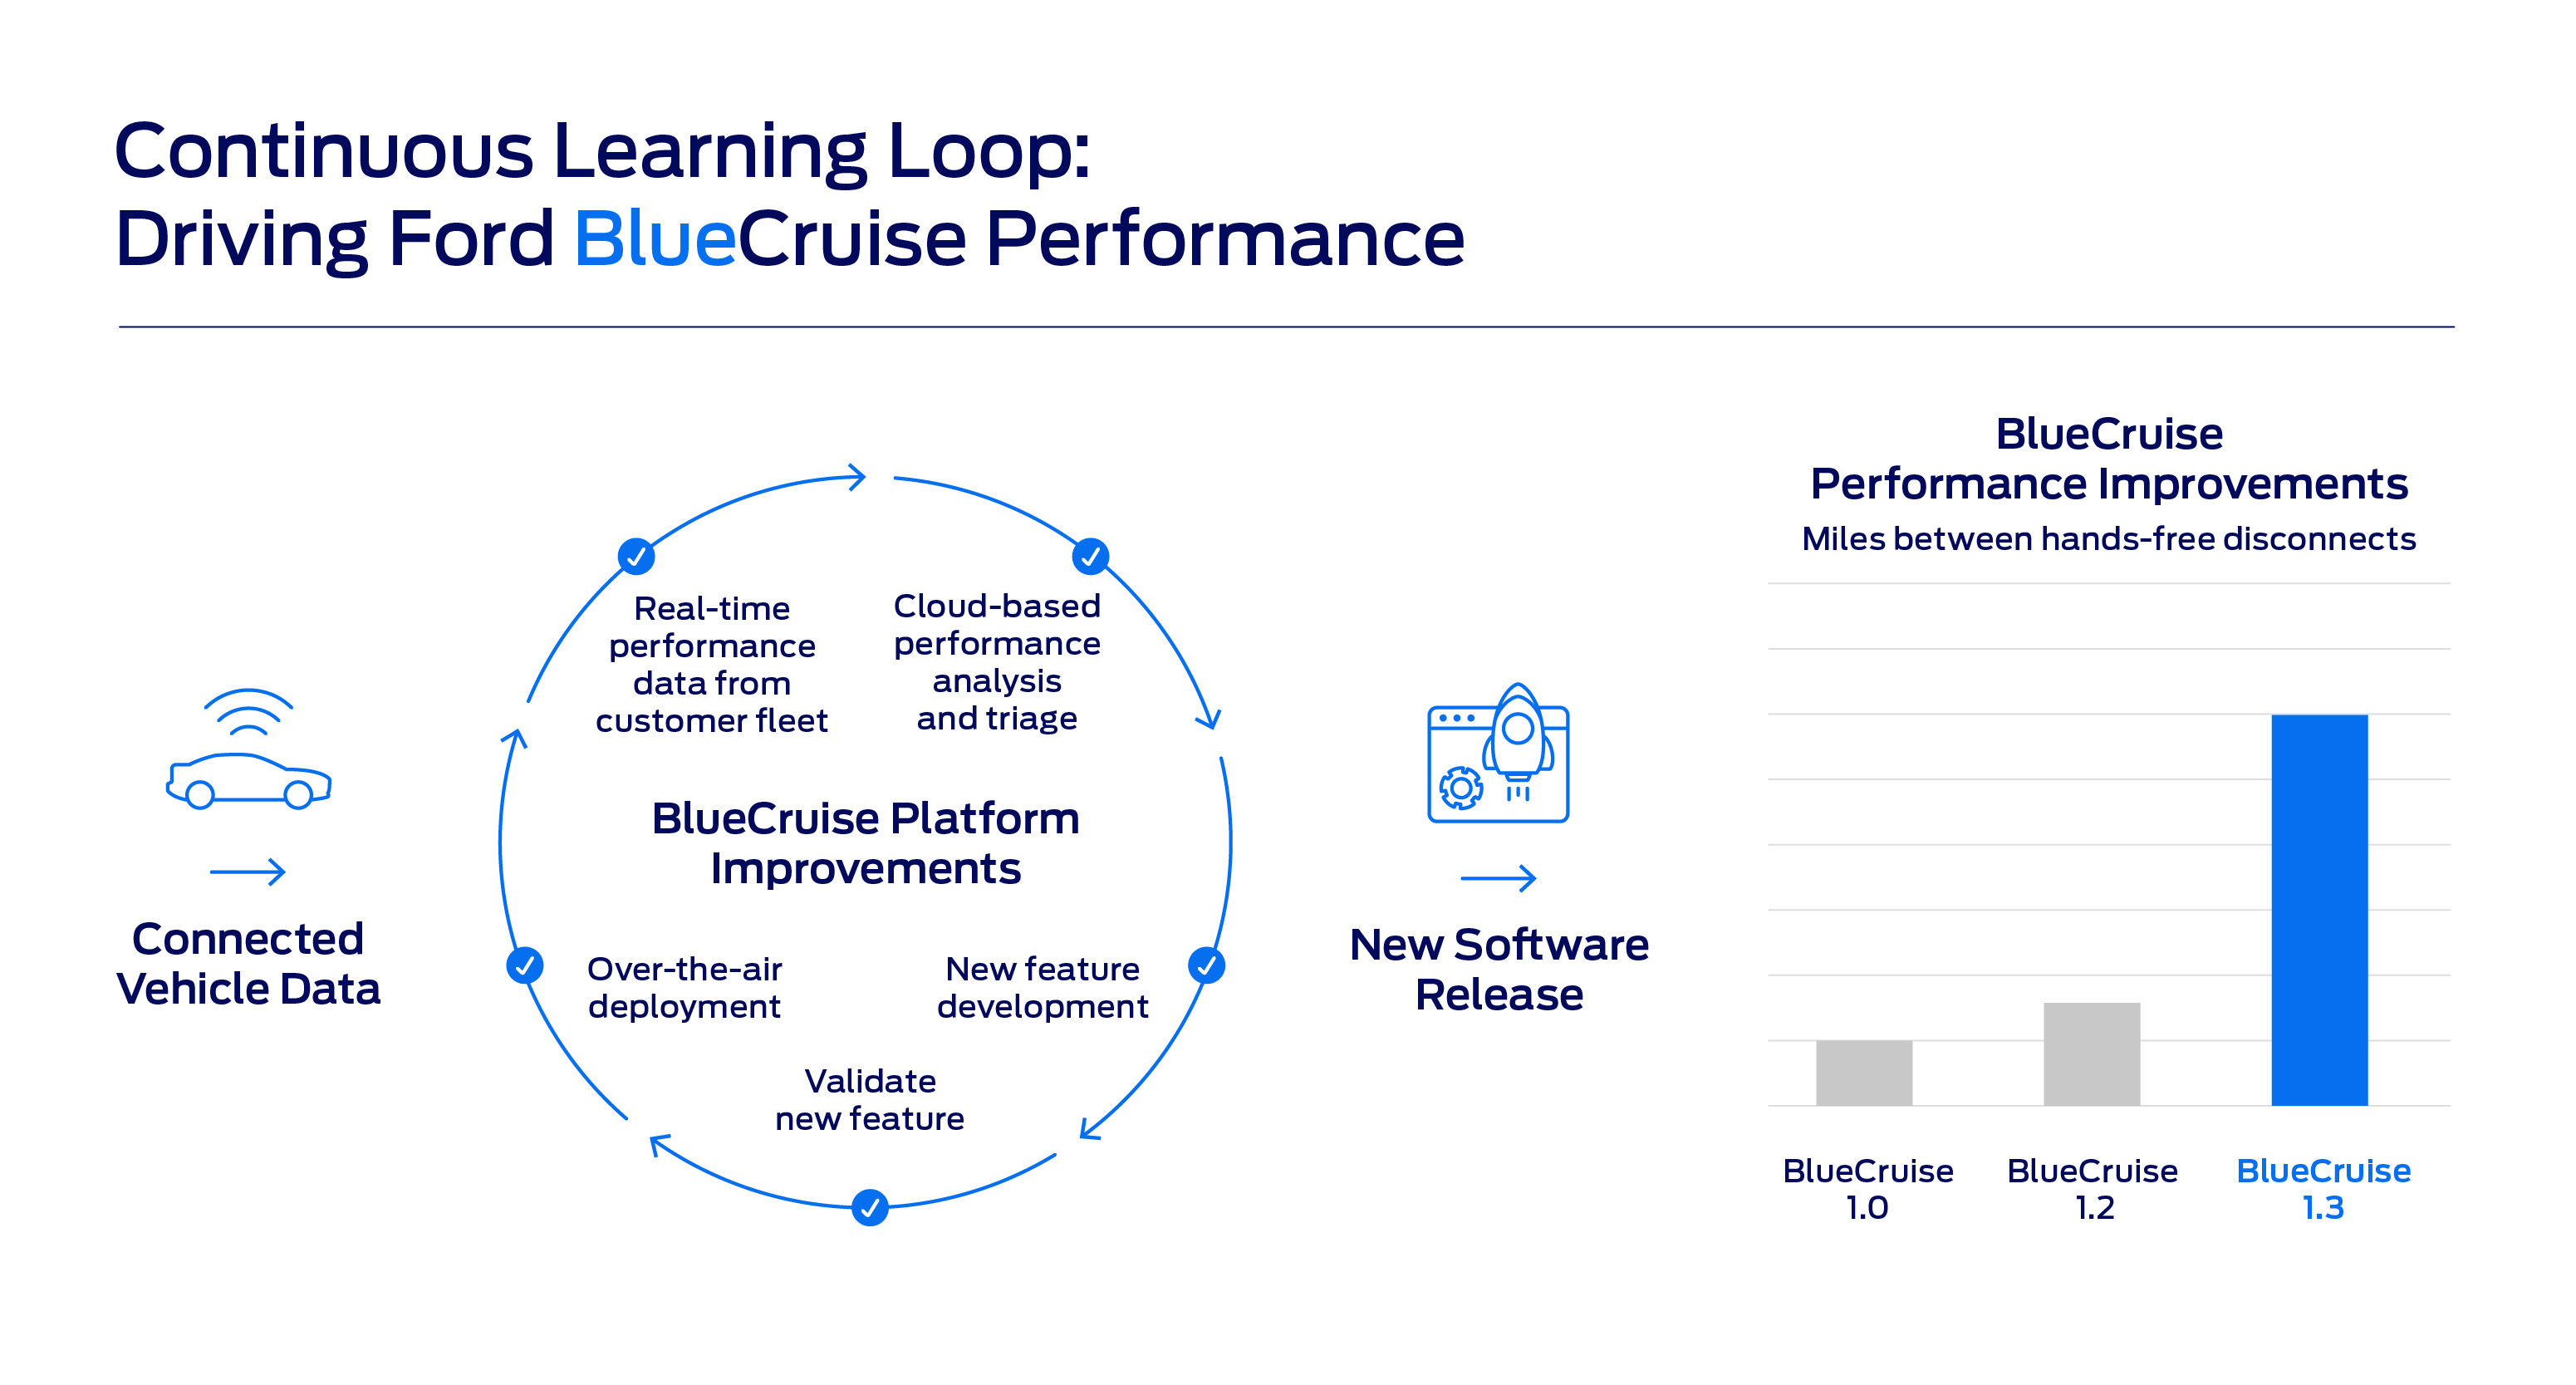 BlueCruise Learning Loop and progress (chart)